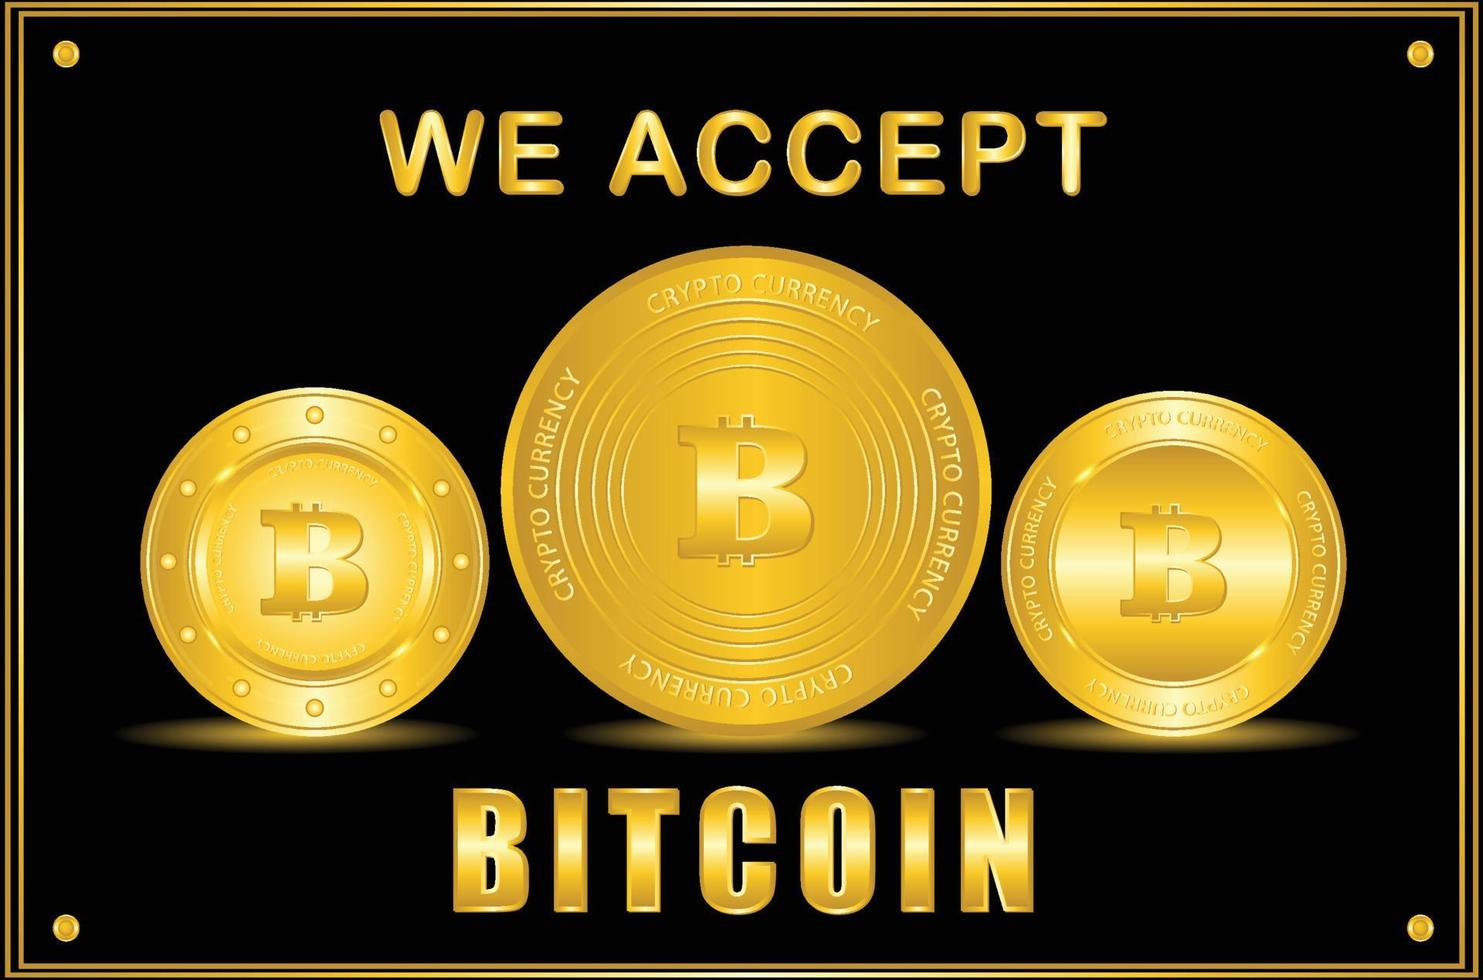 accepting bitcoin as payment machiens